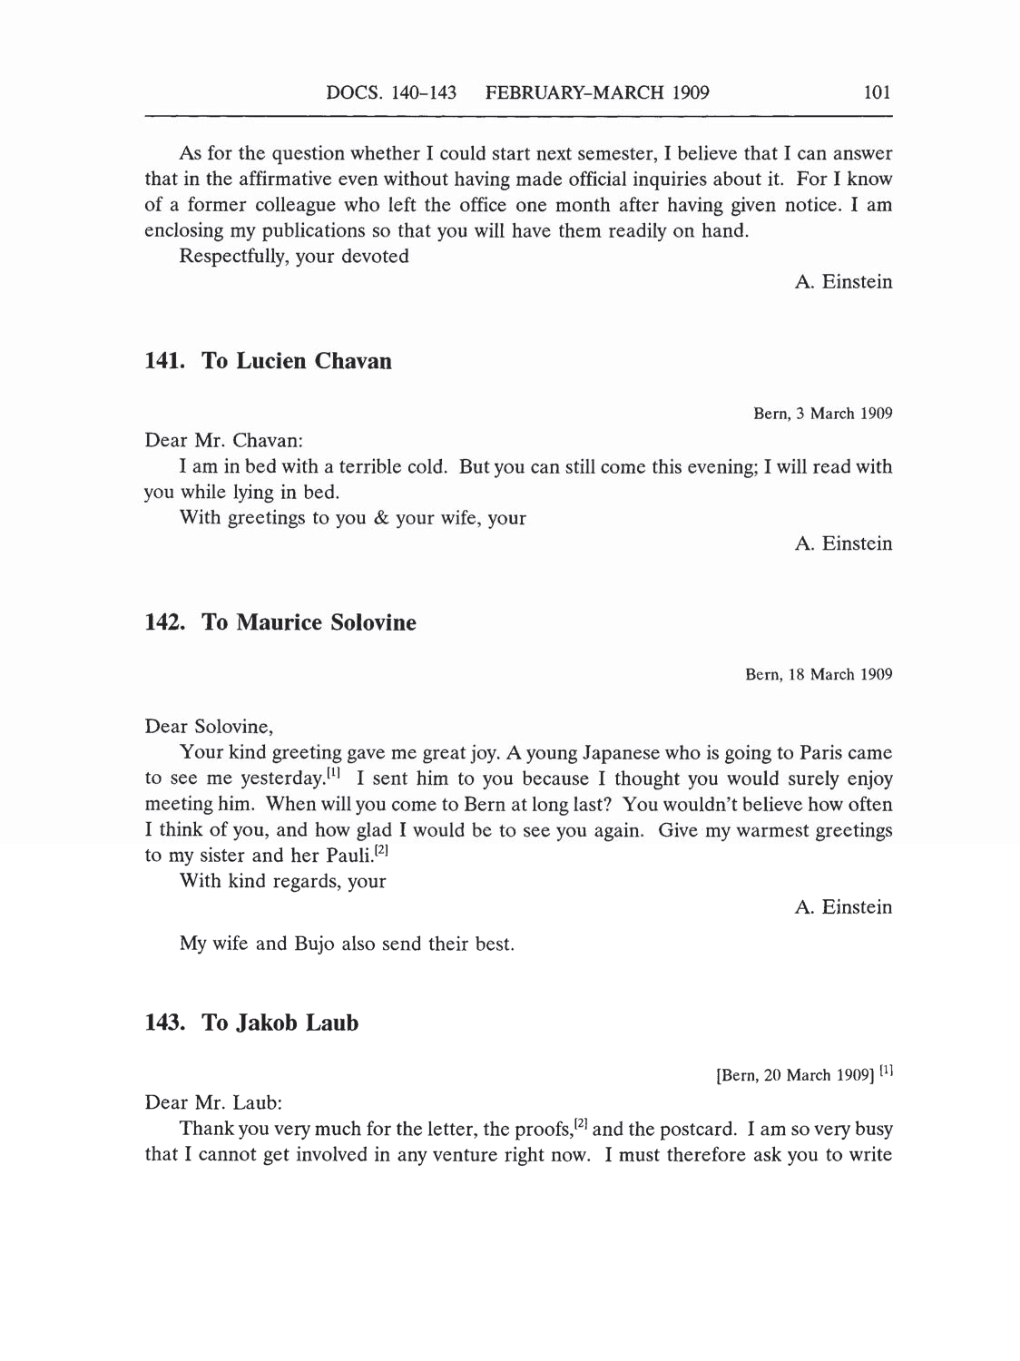 Volume 5: The Swiss Years: Correspondence, 1902-1914 (English translation supplement) page 101